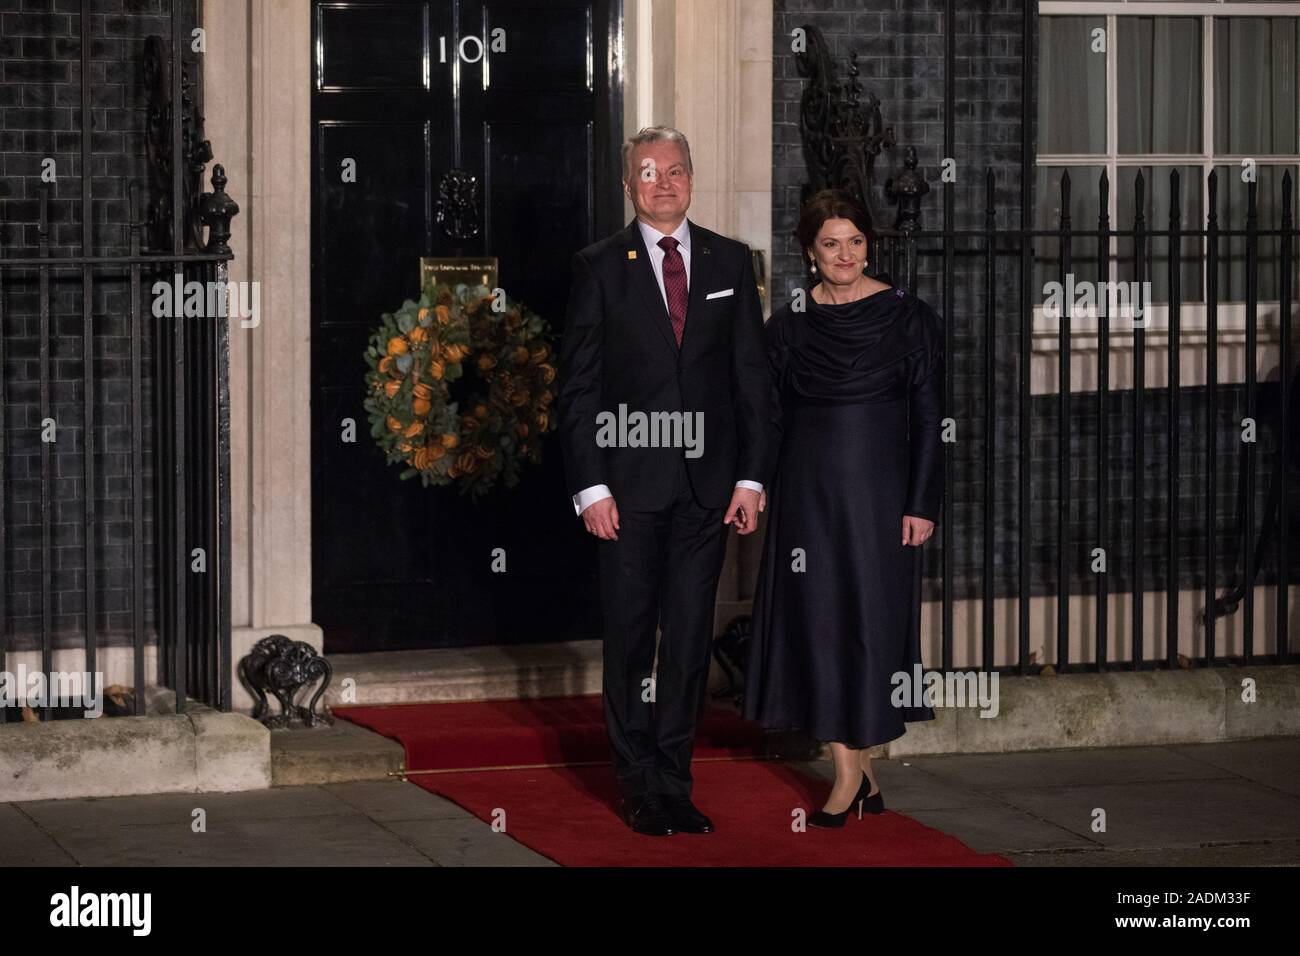 London, UK. 3 December, 2019. Gitanas Nausėda, President of Lithuania, arrives with his wife Diana Nausėdienė for a reception for NATO leaders at 10 Downing Street on the eve of the military alliance’s 70th anniversary summit at a luxury hotel near Watford. Credit: Mark Kerrison/Alamy Live News Stock Photo